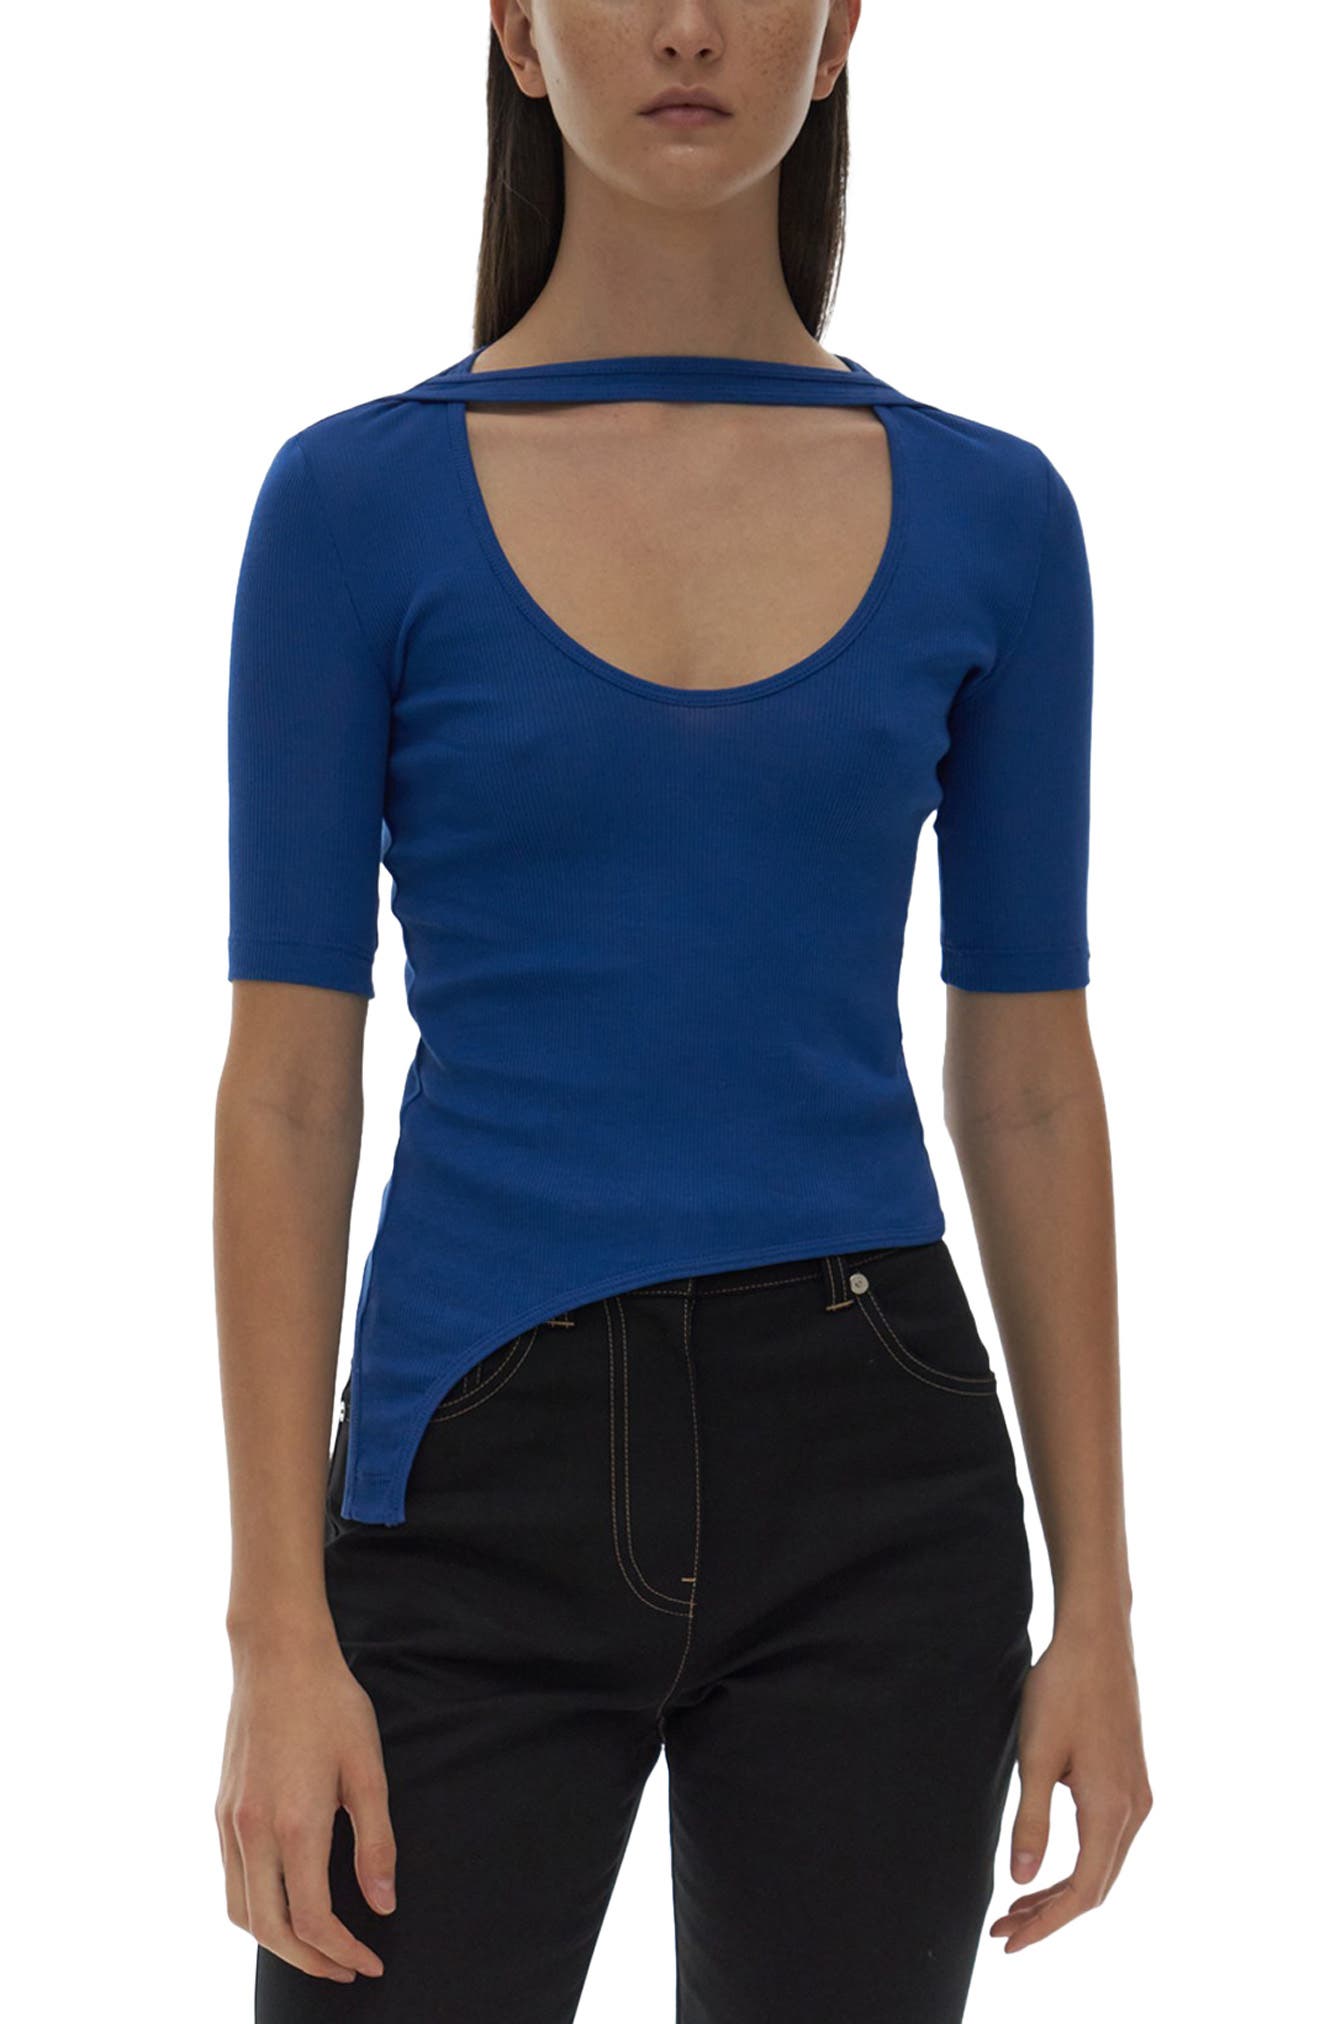 Helmut Lang Asymmetric Cotton Cutout Top in Royal Blue at Nordstrom, Size Xx-Small